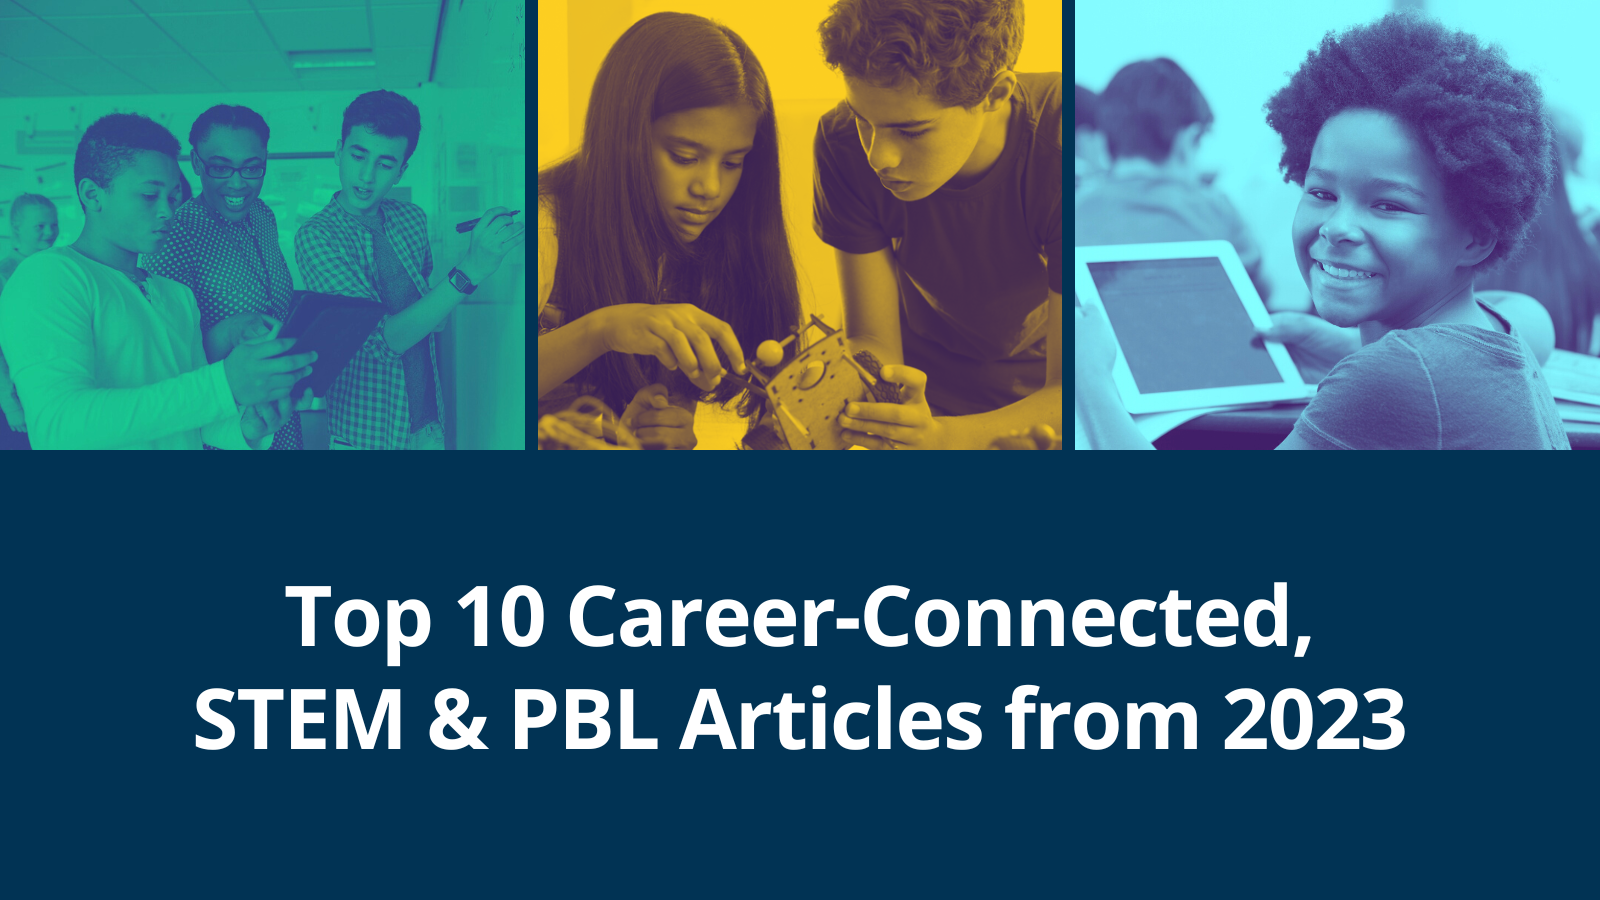 Top 10 Career-Connected, STEM & PBL Articles from 2023